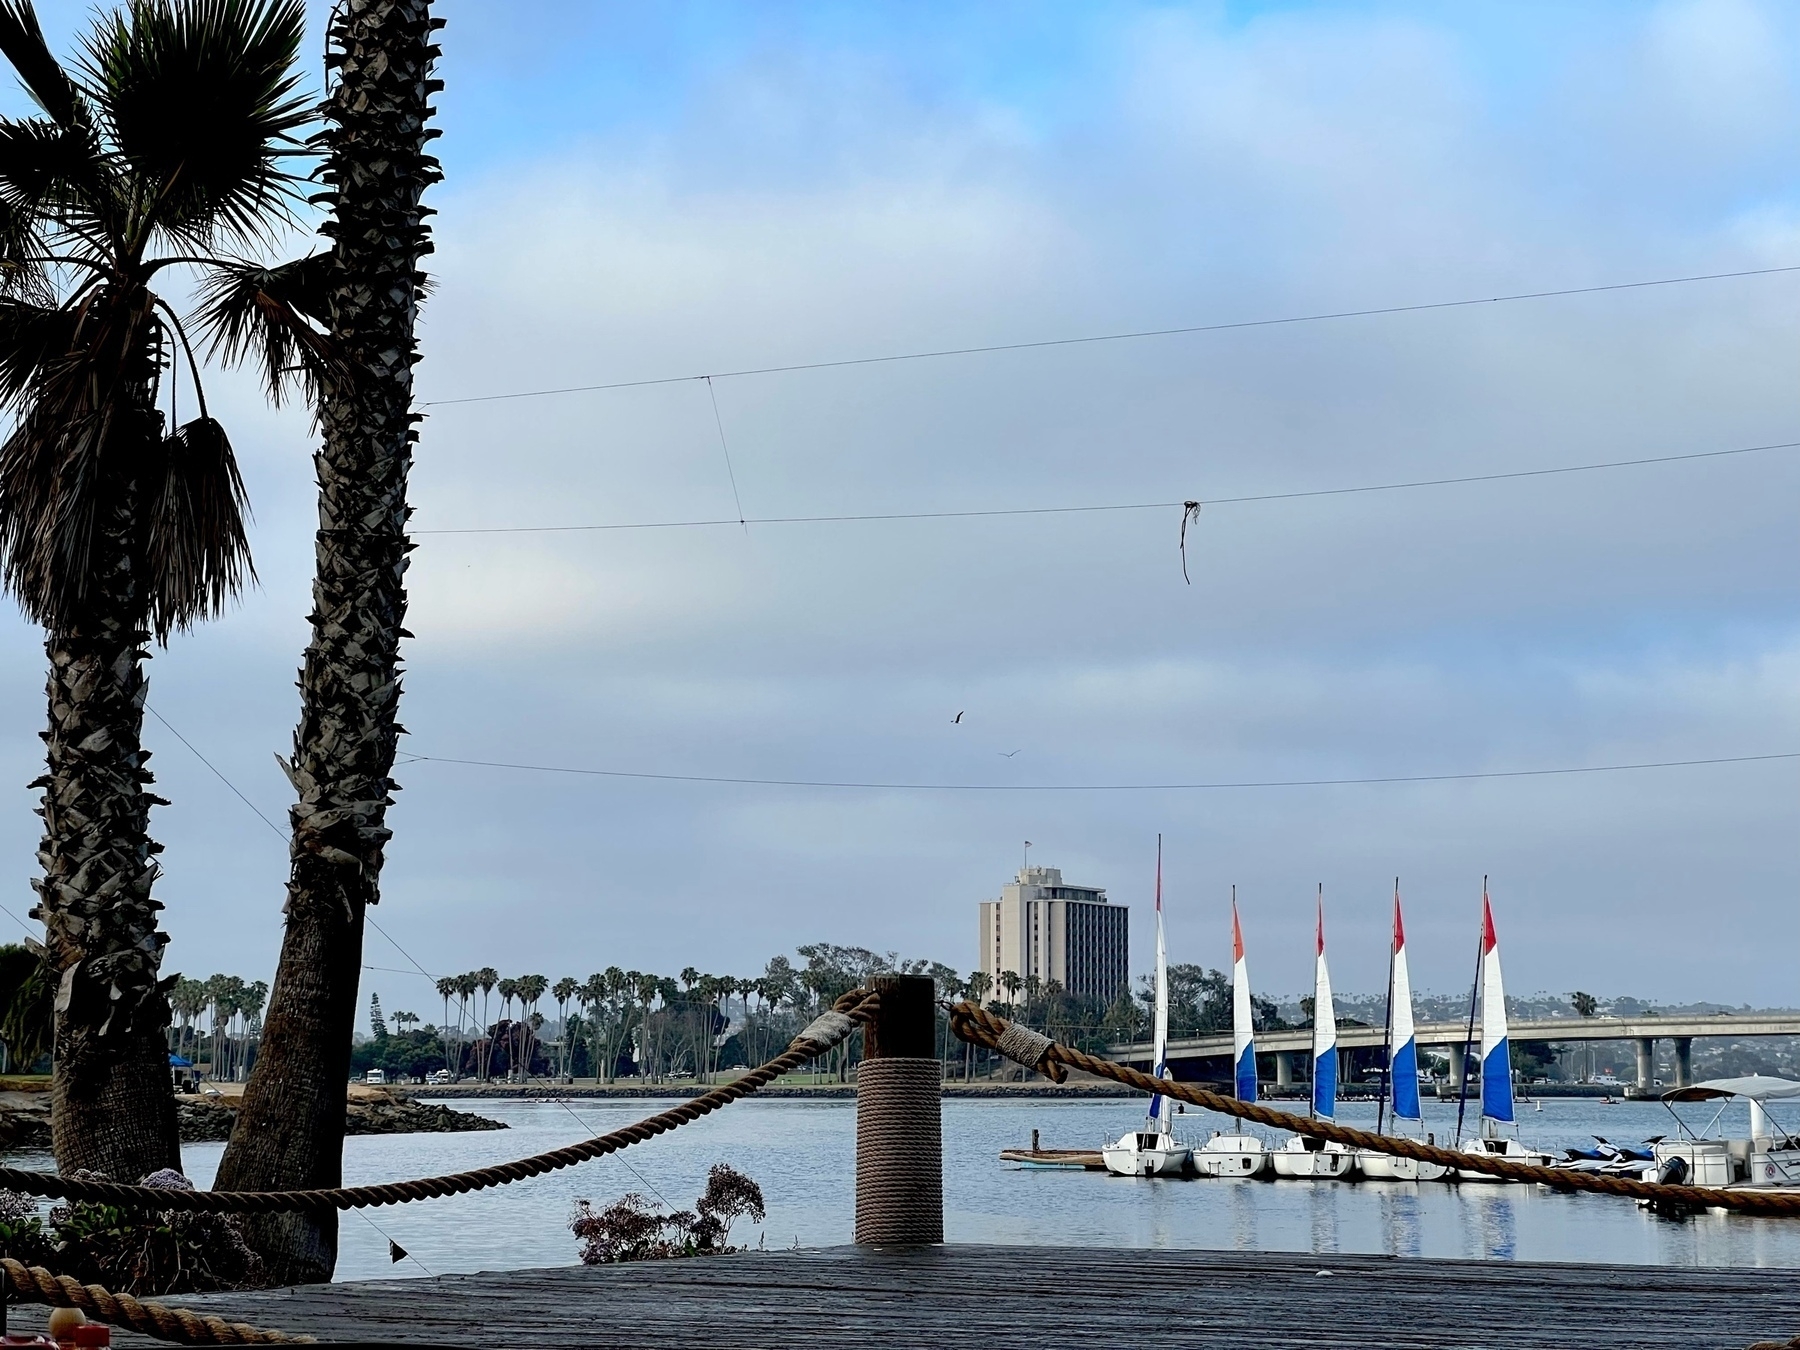 a view if Mission Bay marina from an outdoor dining oatio, on San Diego California. There are three docked sailboats with red white and blue sails. in the distance is a tall hotel, on the ither side of the water. 